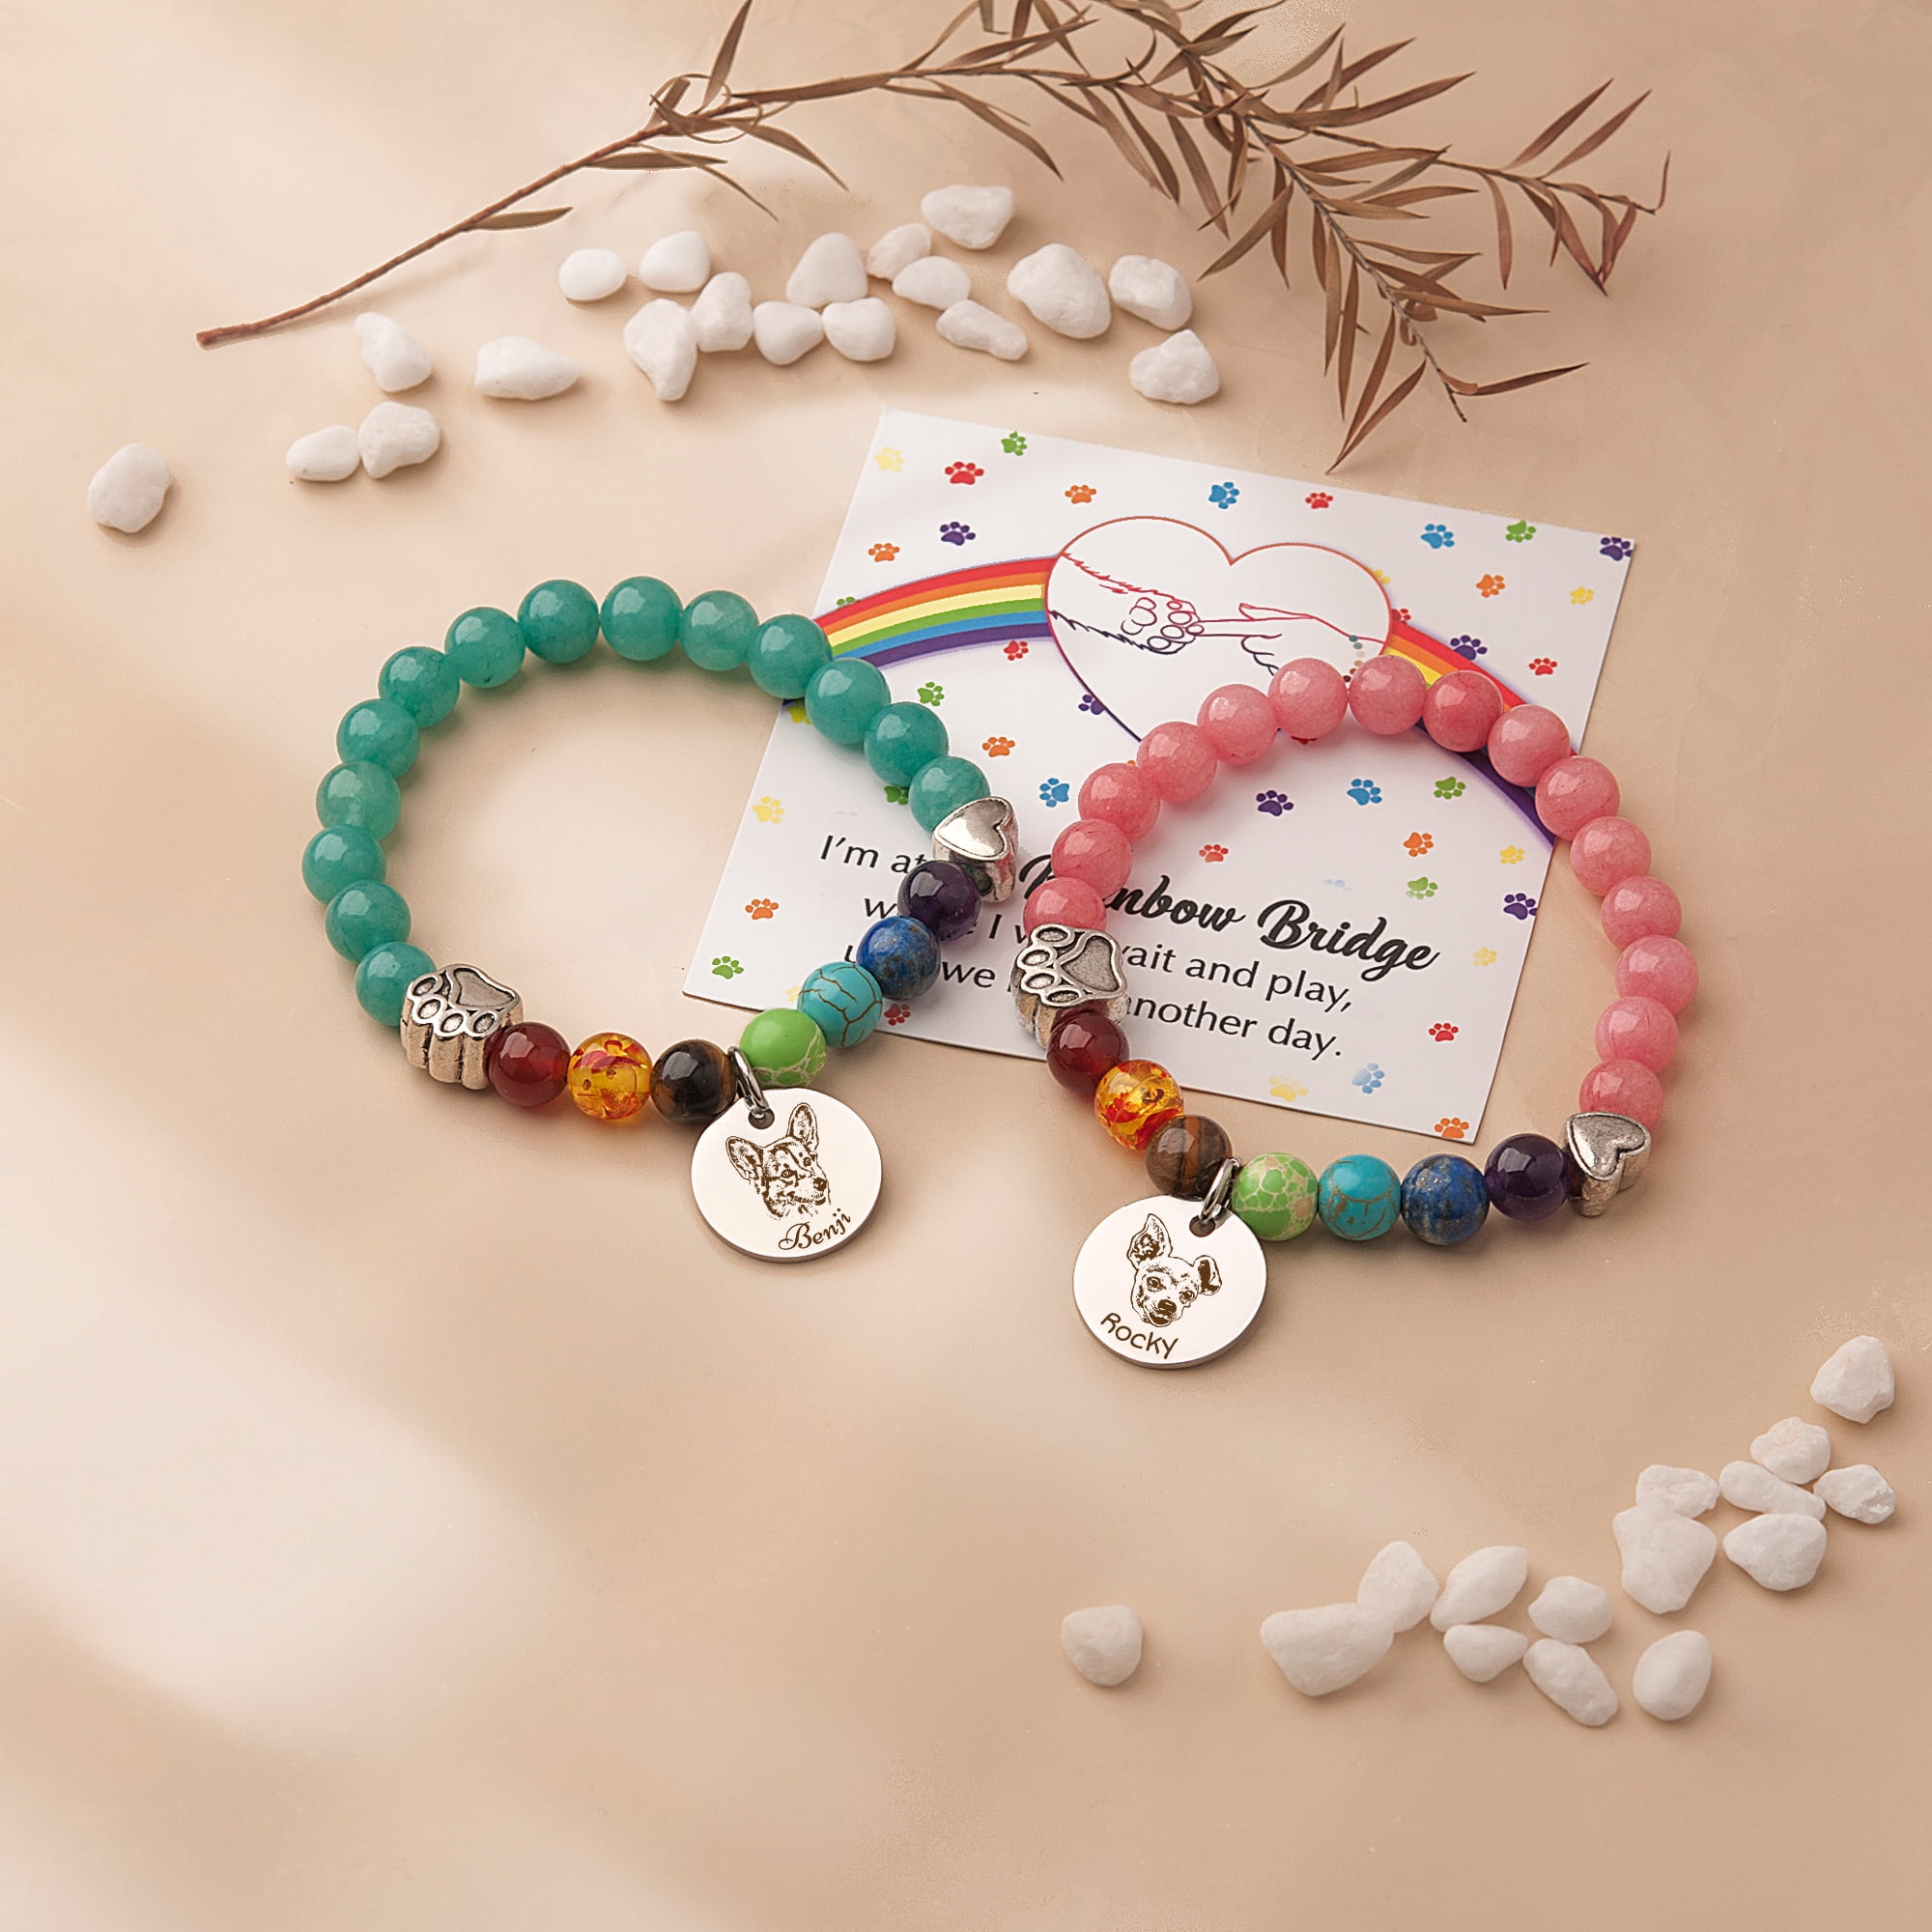 Personalized Memorial Bracelet of Tears for sale in Co Dublin for 15 on  DoneDeal